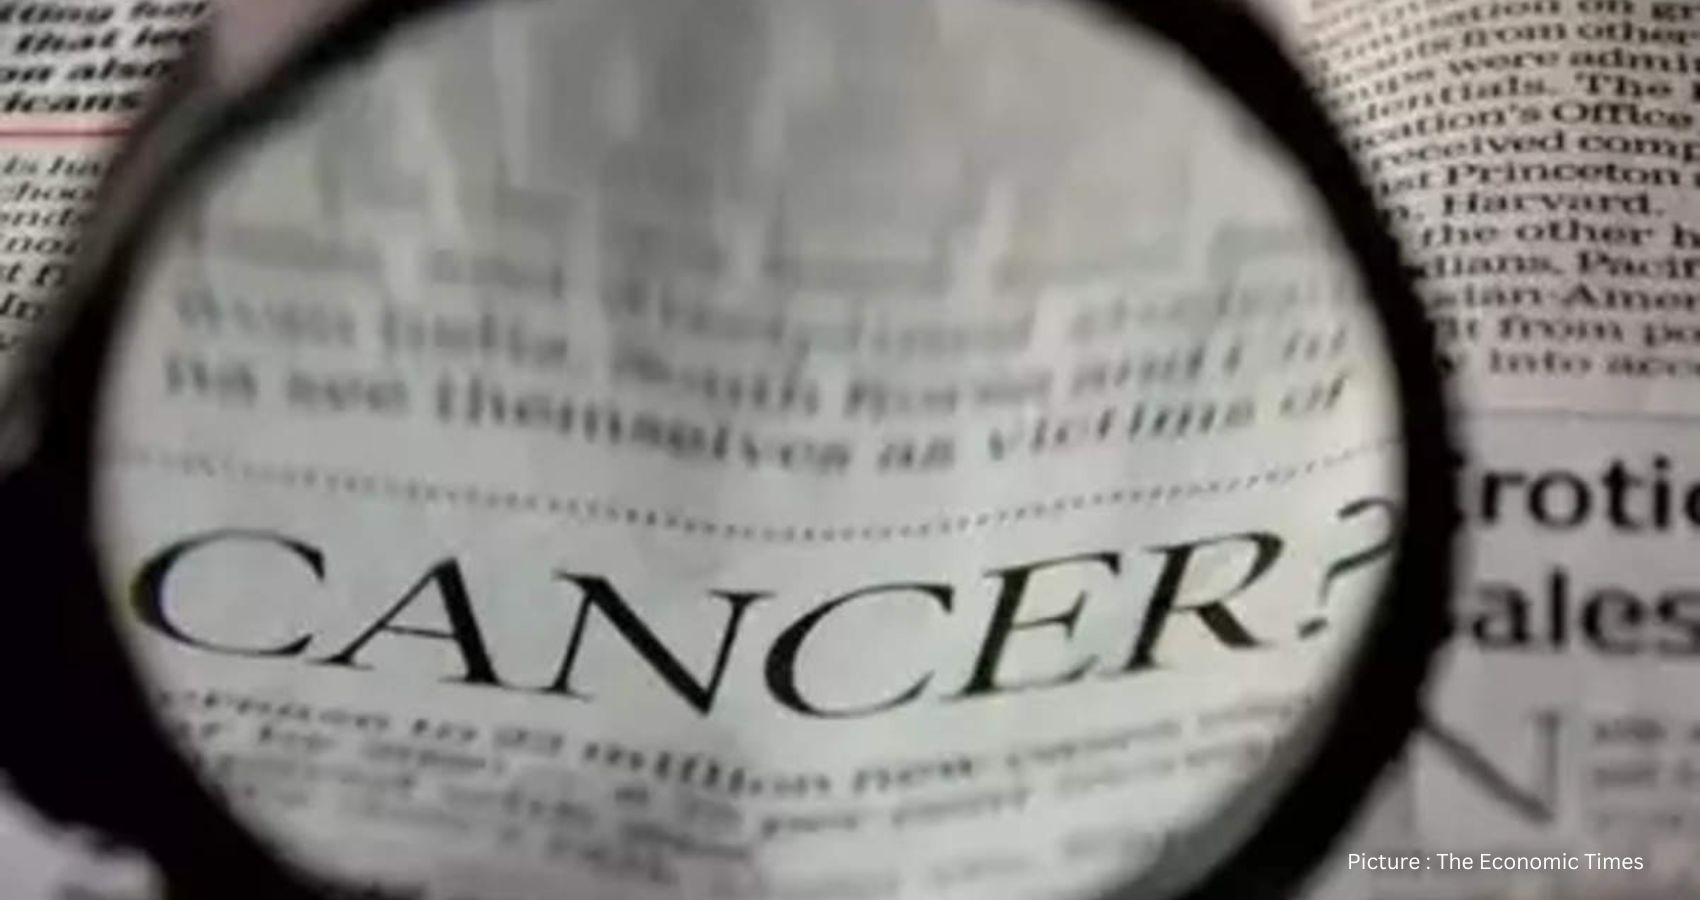 India’s Health Crisis Unveiled: Rising Cancer Cases Make Nation ‘Cancer Capital of the World’, Apollo Hospitals Report Warns